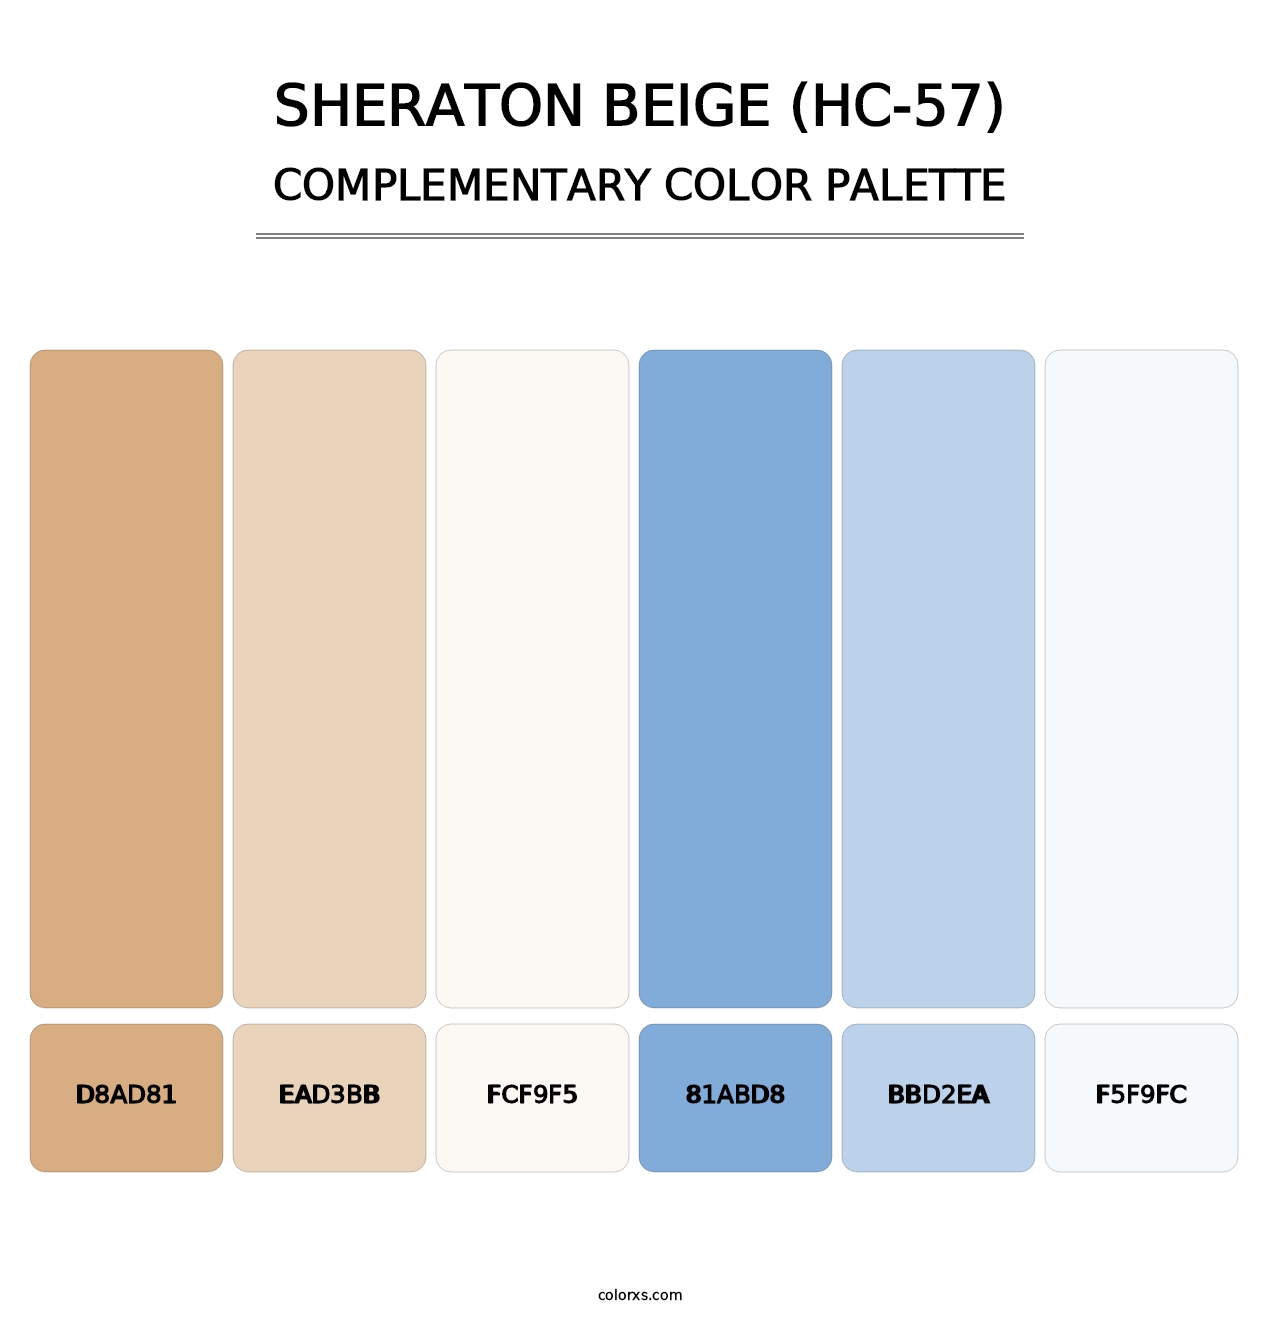 Sheraton Beige (HC-57) - Complementary Color Palette